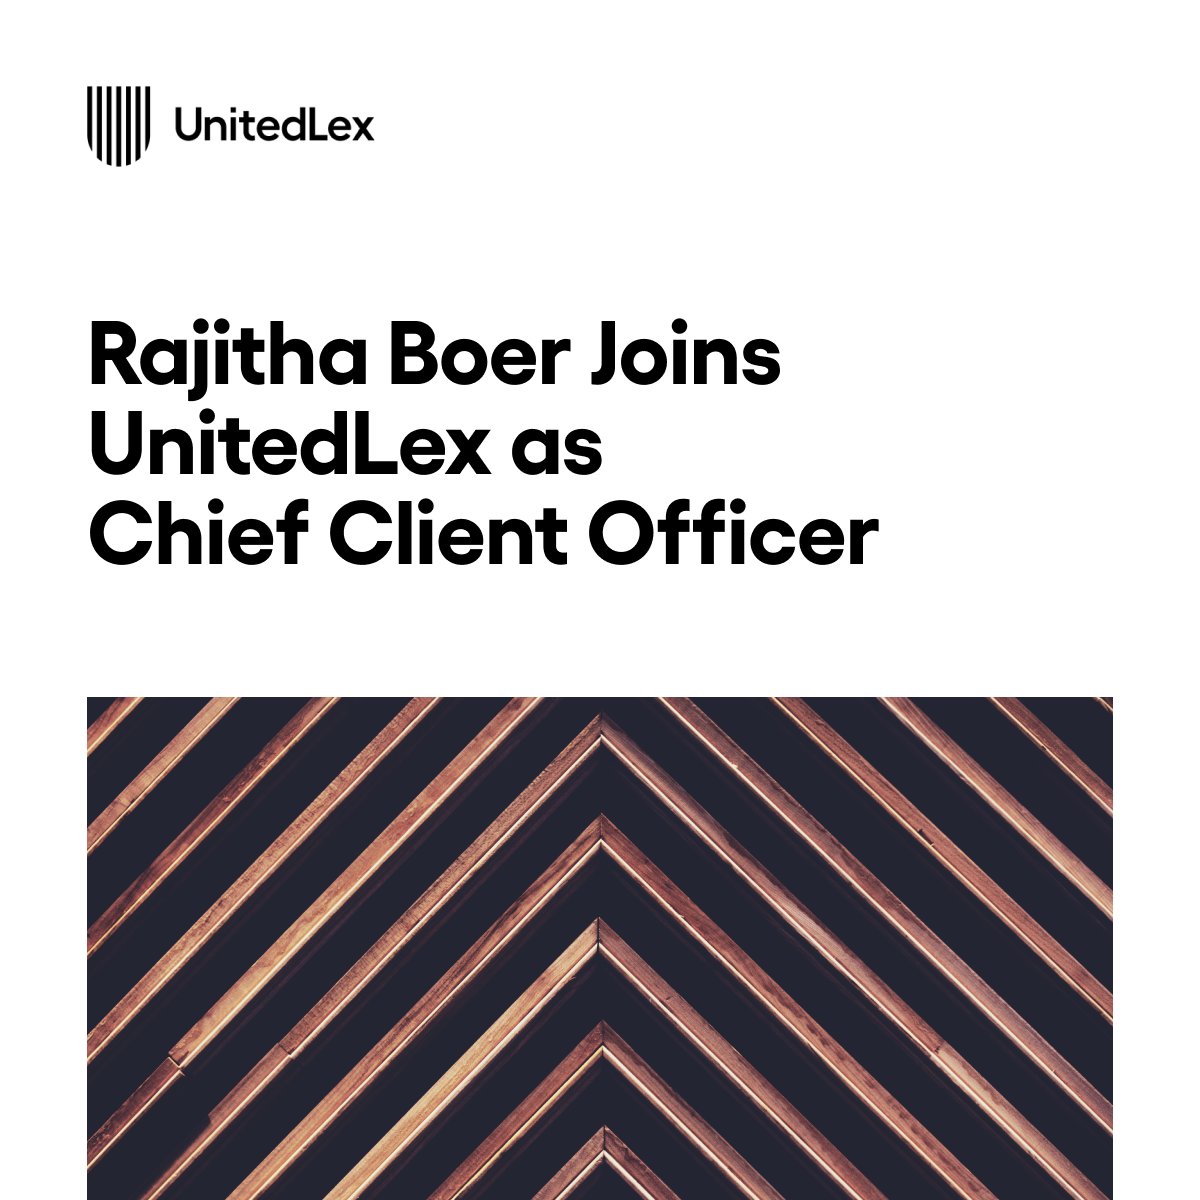 “Rajitha brings a philosophy that one-size-does-not-fit-all when it comes to strategic client solutions,” commented James Schellhase, UnitedLex CEO, on Rajitha Boer joining the company as Chief Client Officer. Read the full release here: hubs.li/Q02g8F1j0